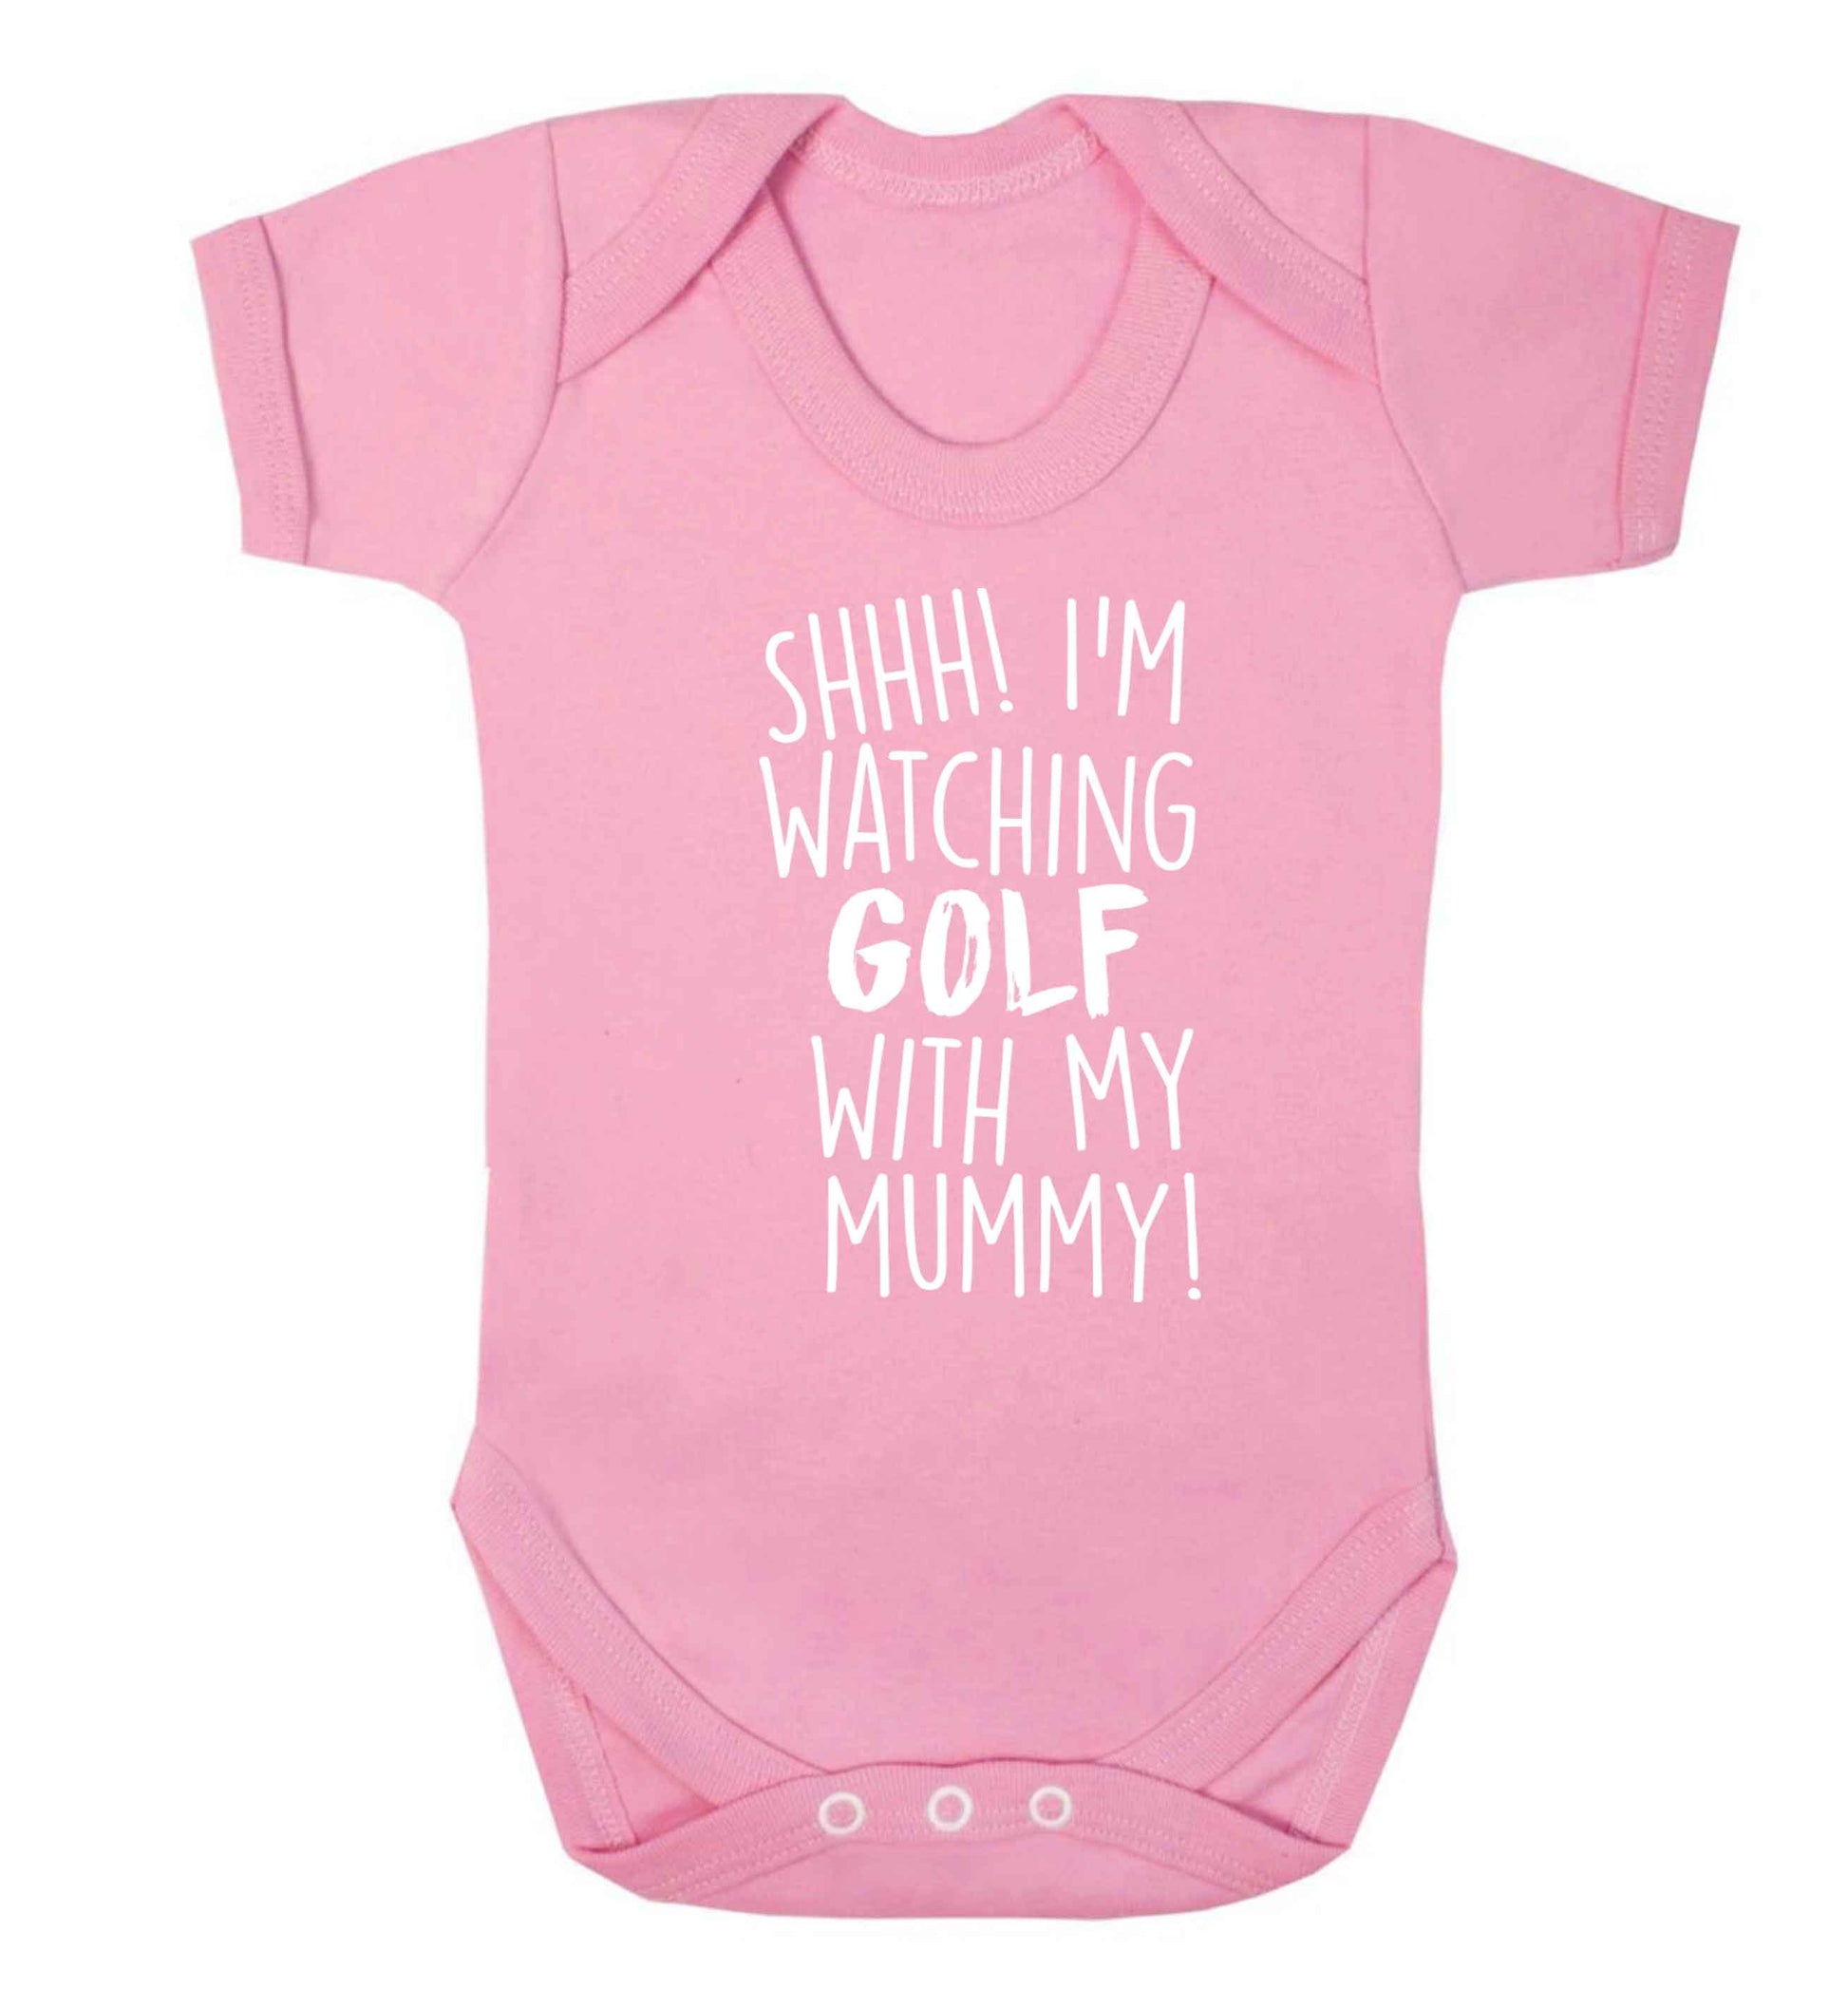 Shh I'm watching golf with my mummy Baby Vest pale pink 18-24 months